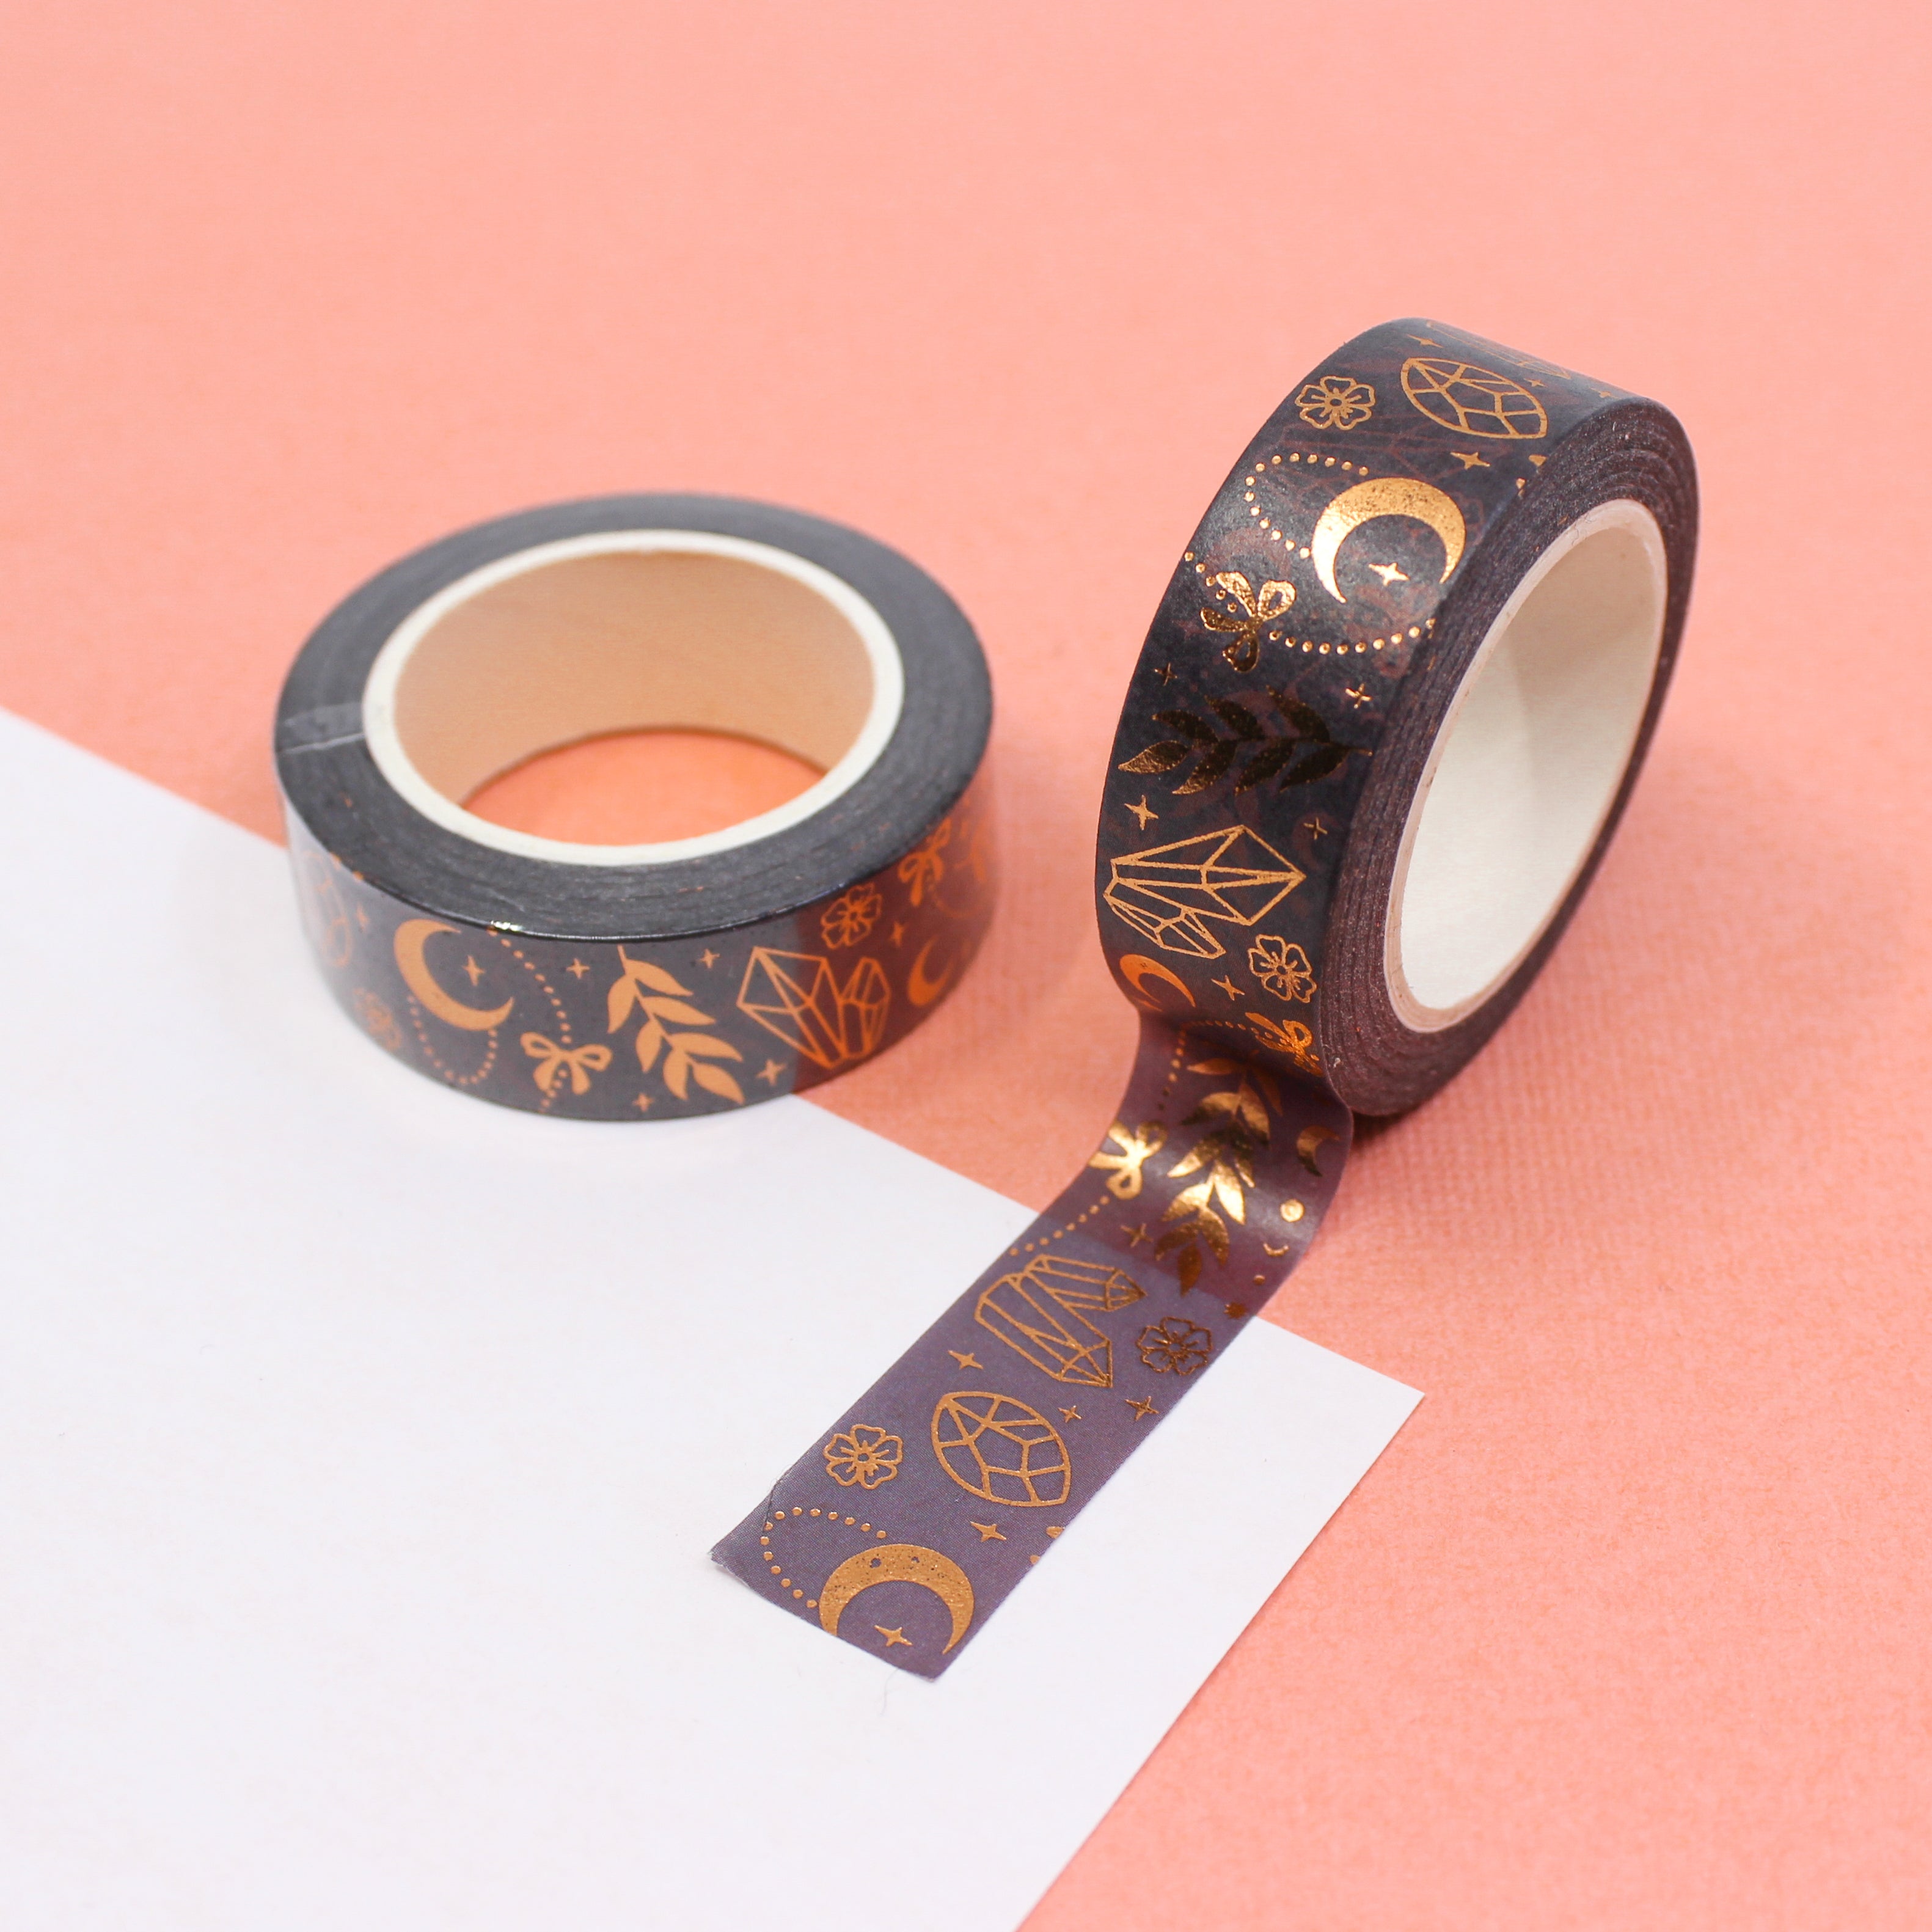 This is copper crystals and celestial points mystical symbols pattern washi tape from BBB Supplies Craft Shop